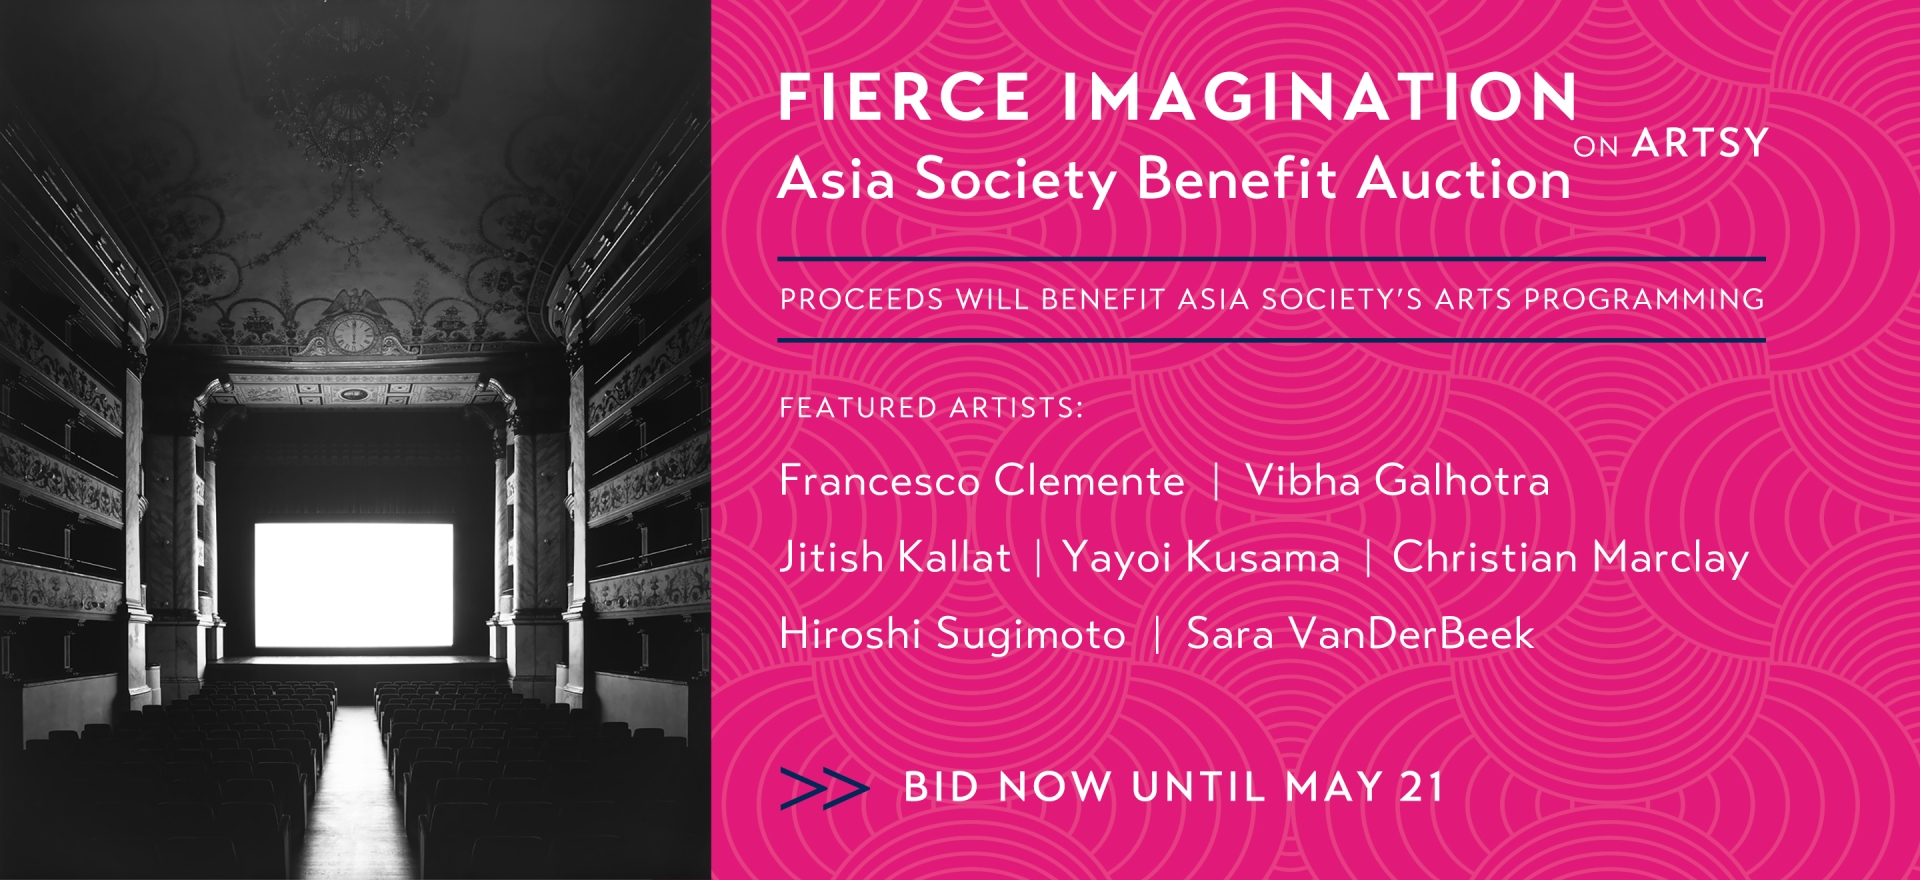 Asia Society Benefit Auction on Artsy